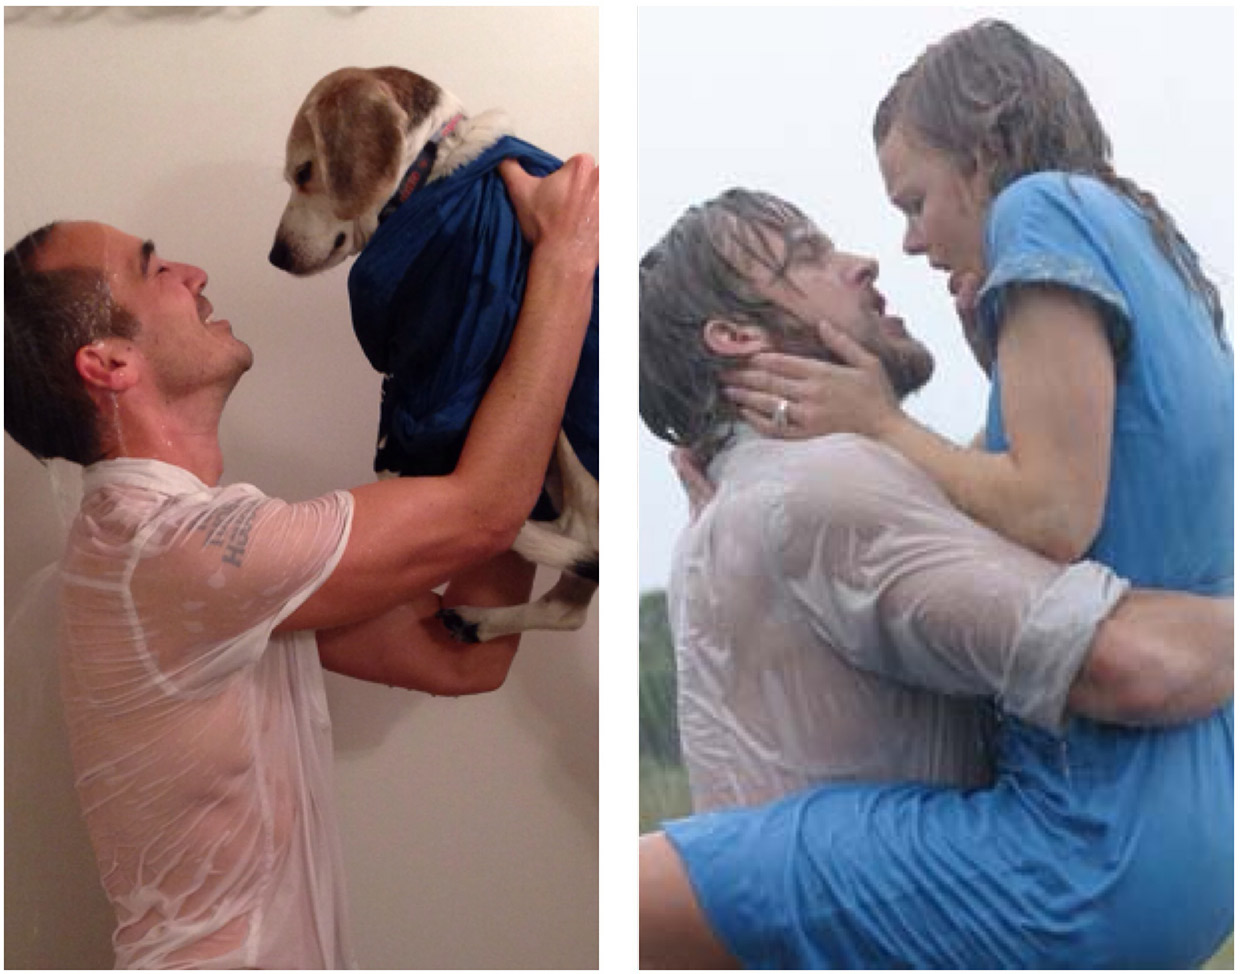 A Man Recreated Romantic Movie Scenes With His Dog! LOL!